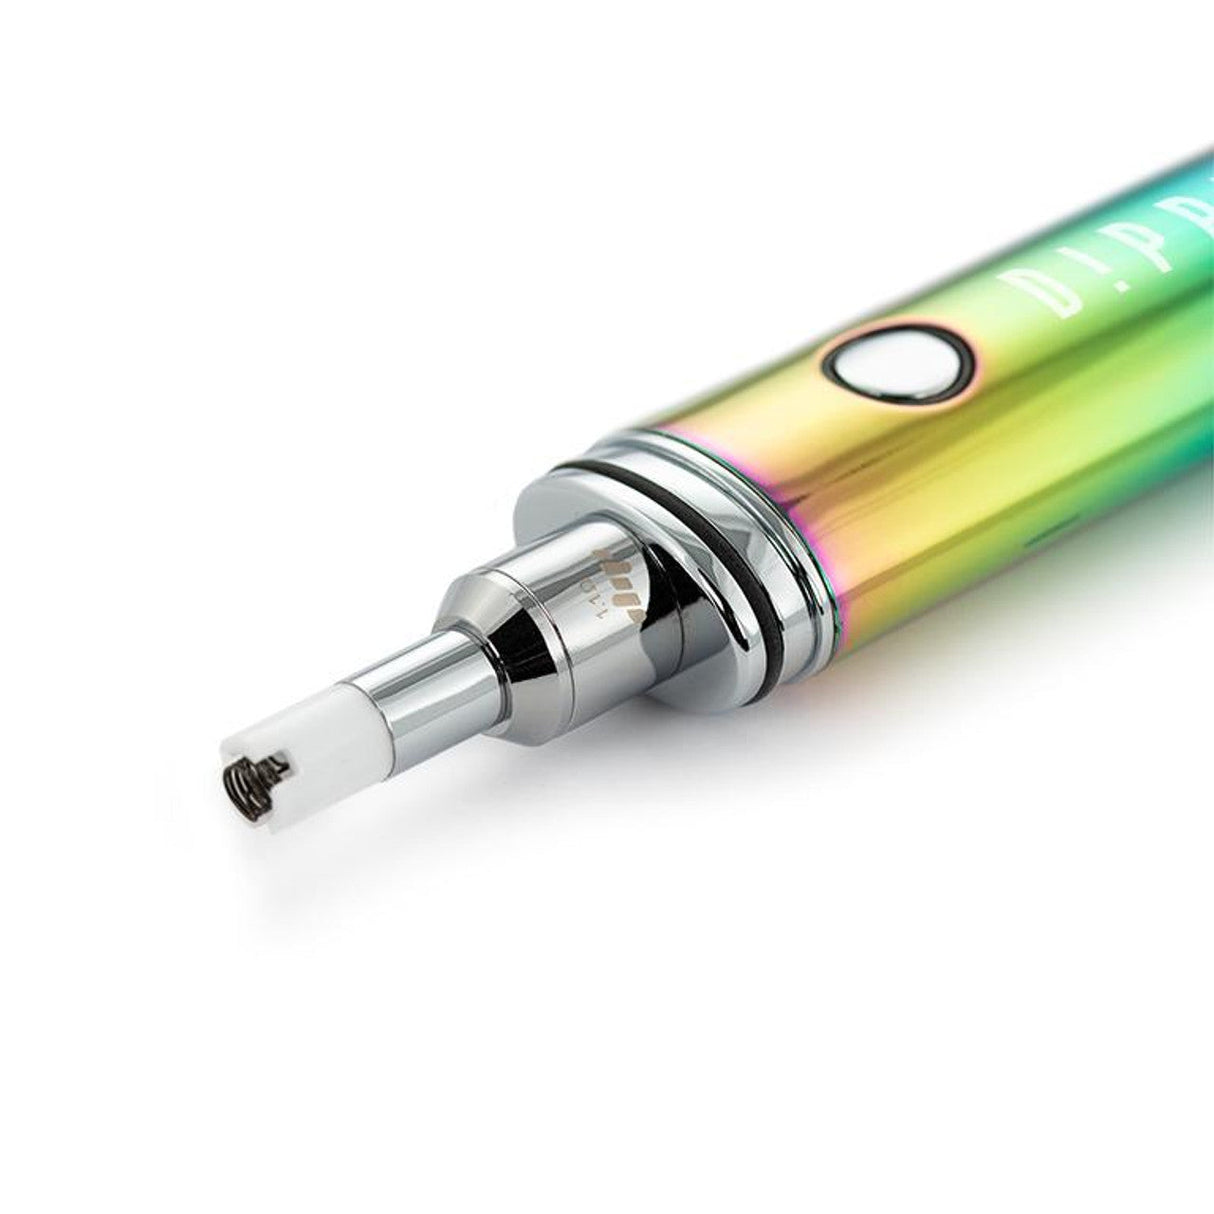 Dipper Vaporizer by Dip Devices in rainbow finish with quartz tip for concentrates, angled view